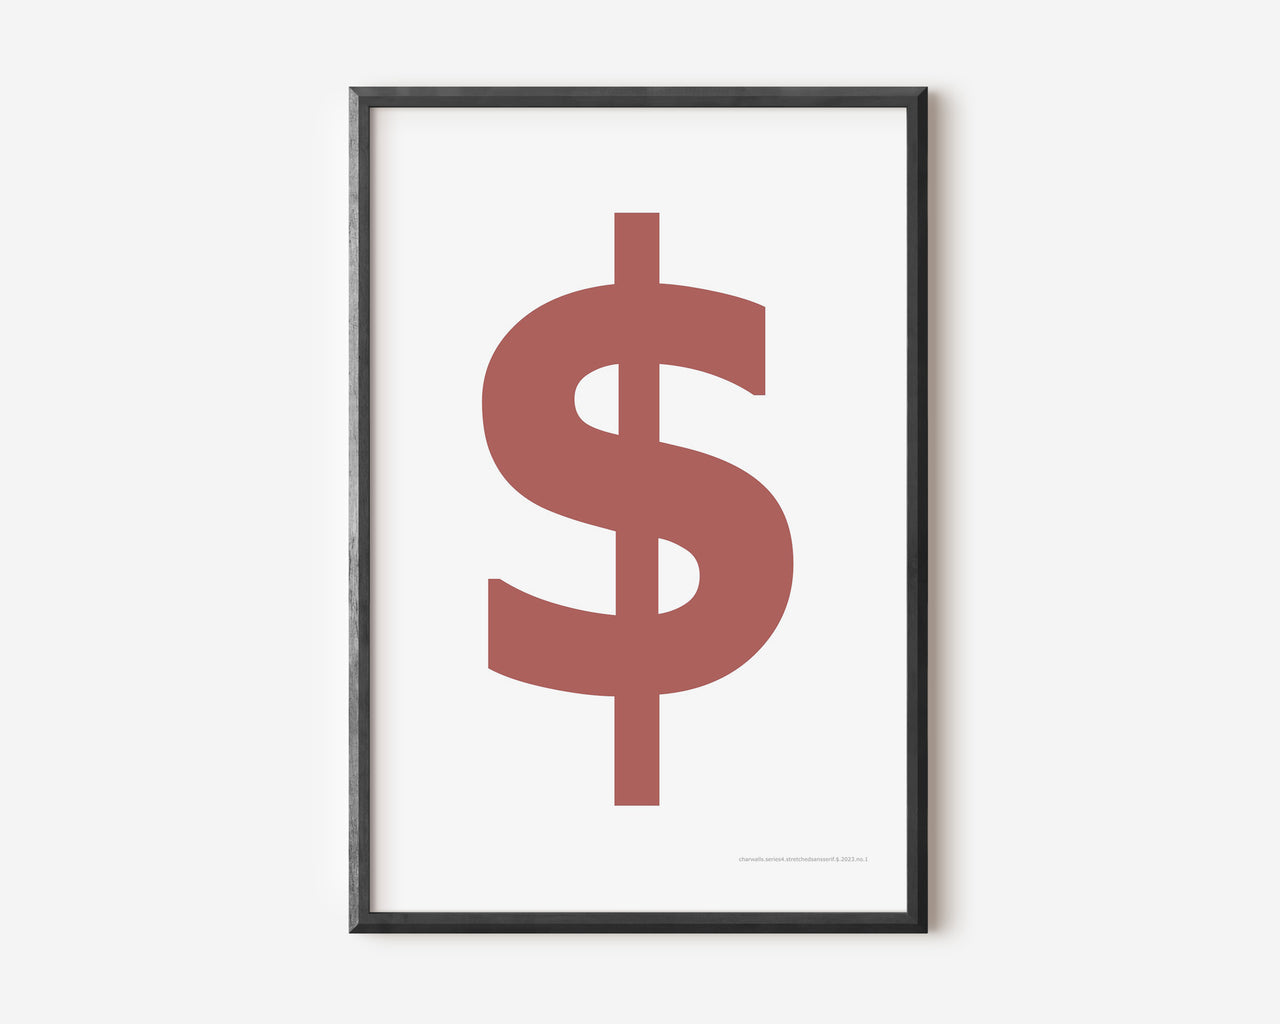 Modern symbol $ art print with a Nantucket red dollar sign on a white background.